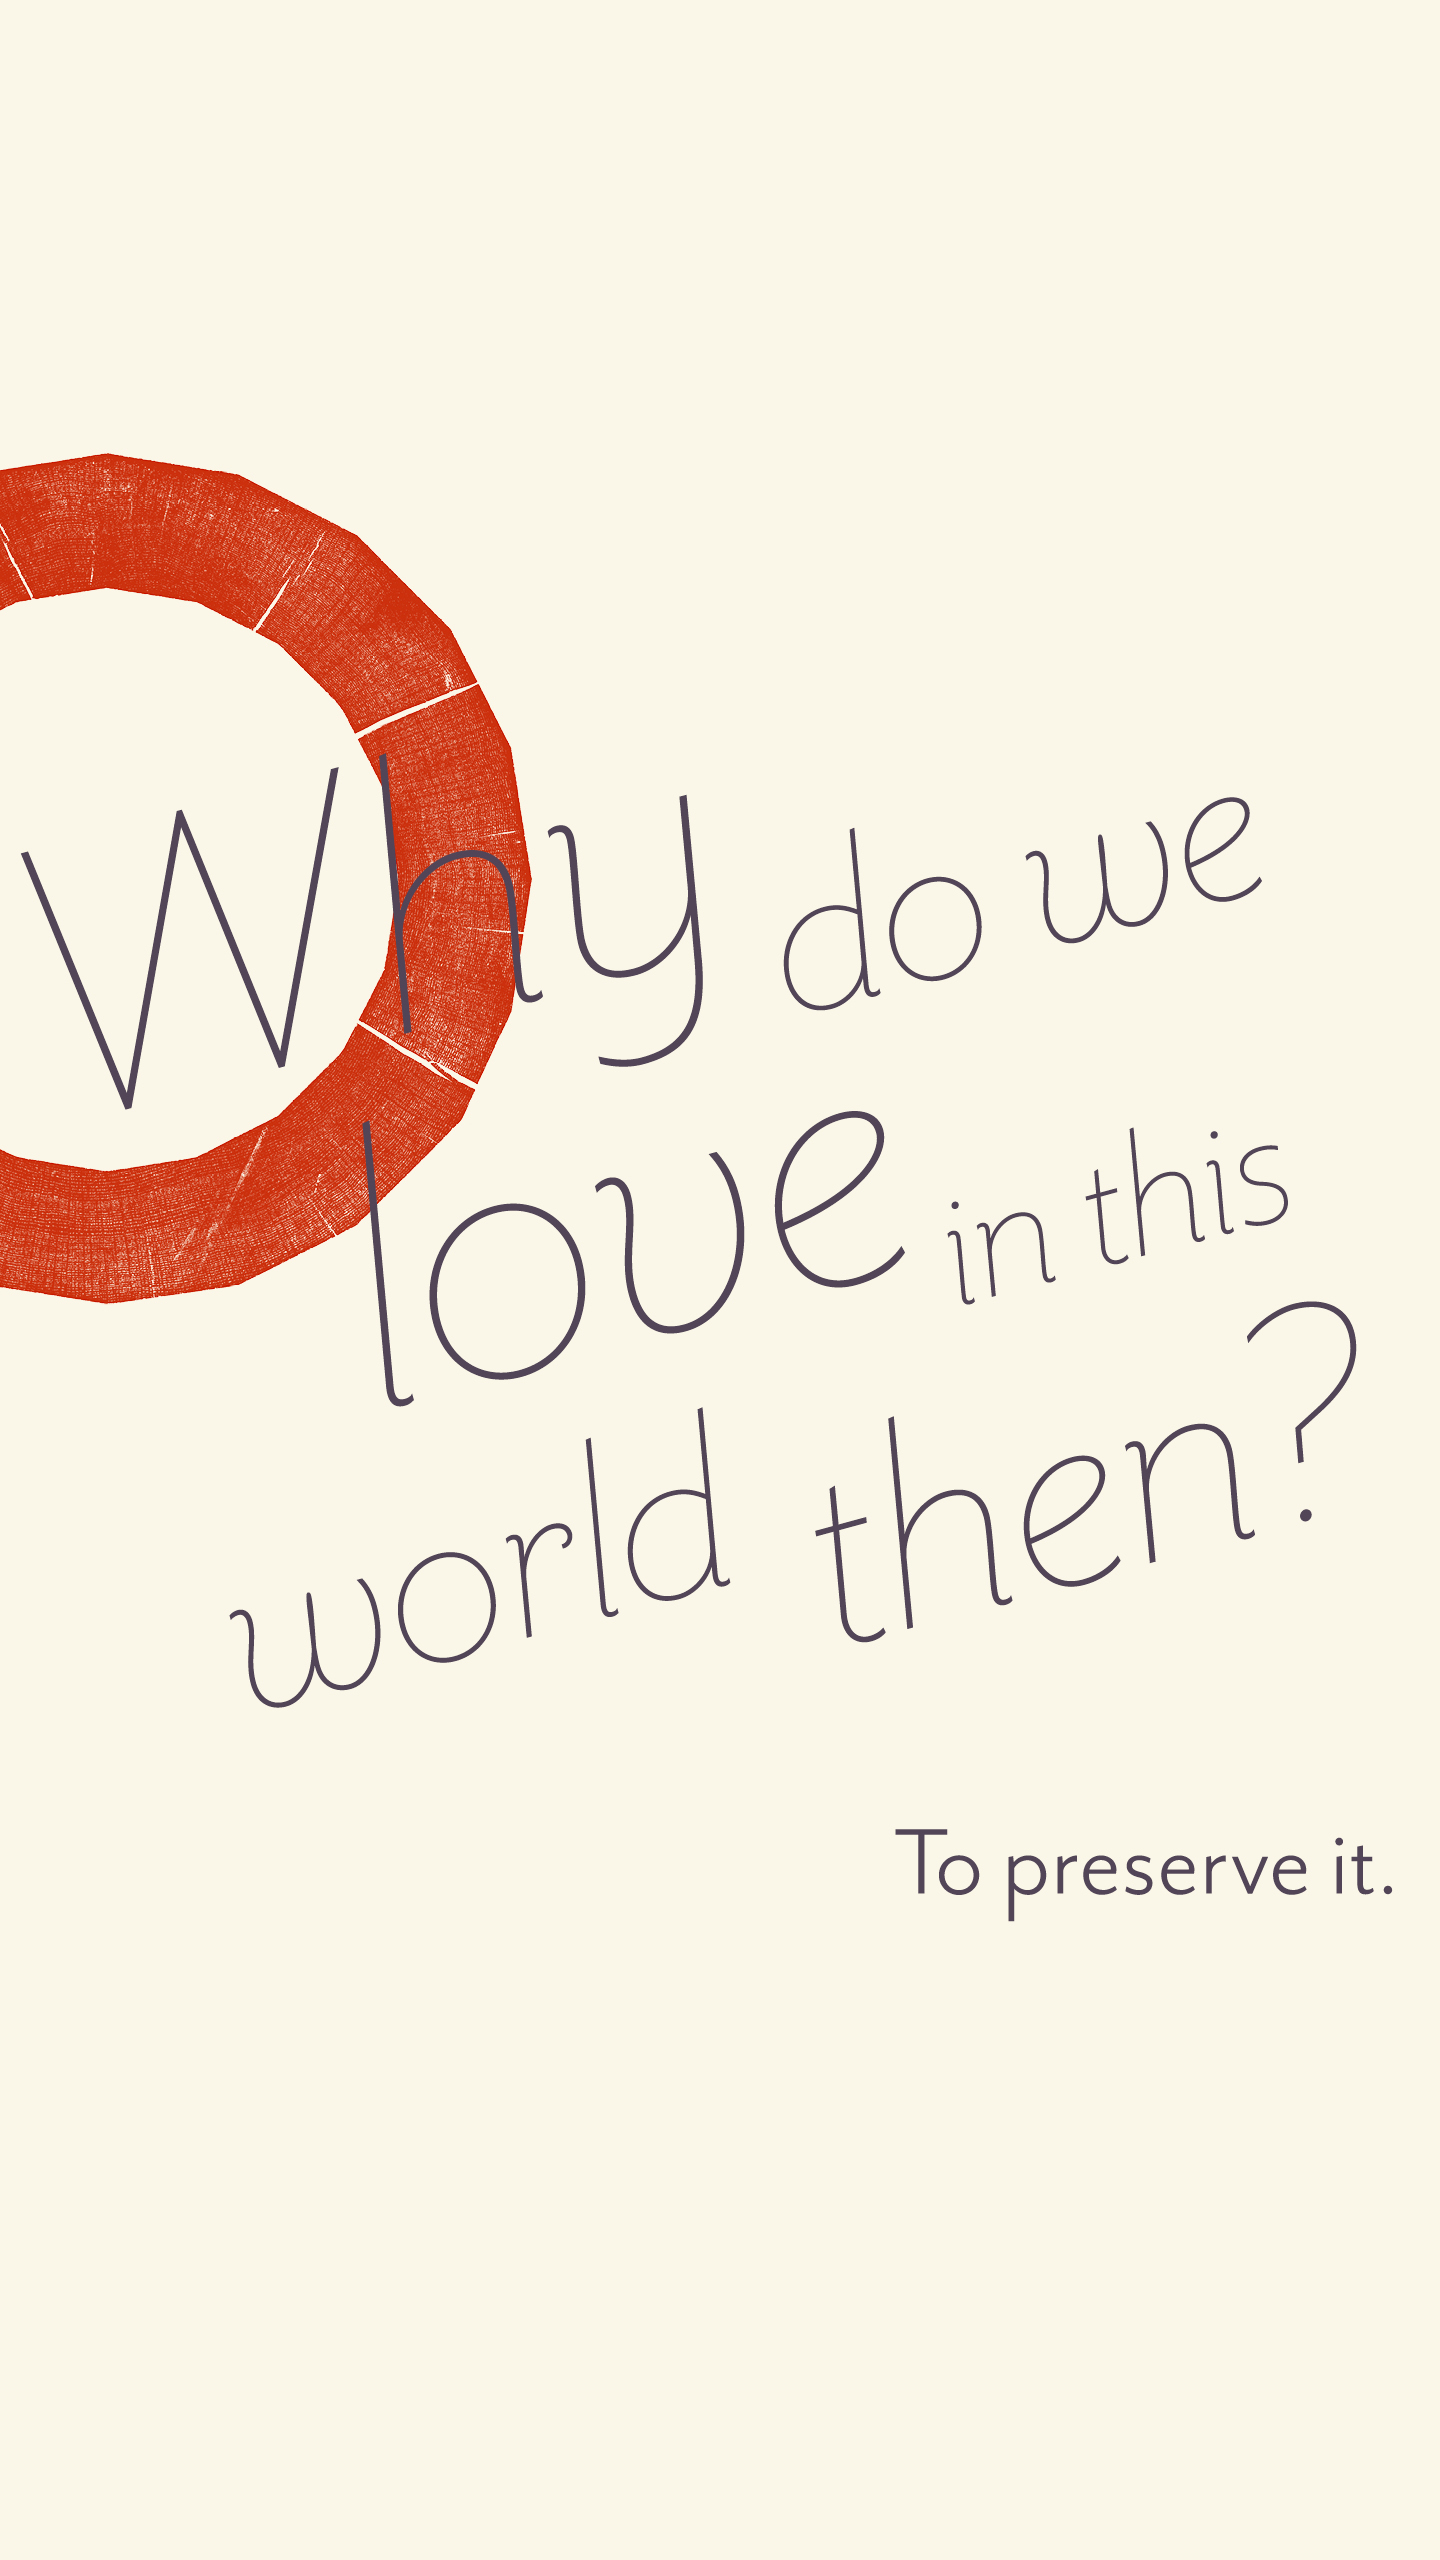 Why do we love in this world then? To preserve it.